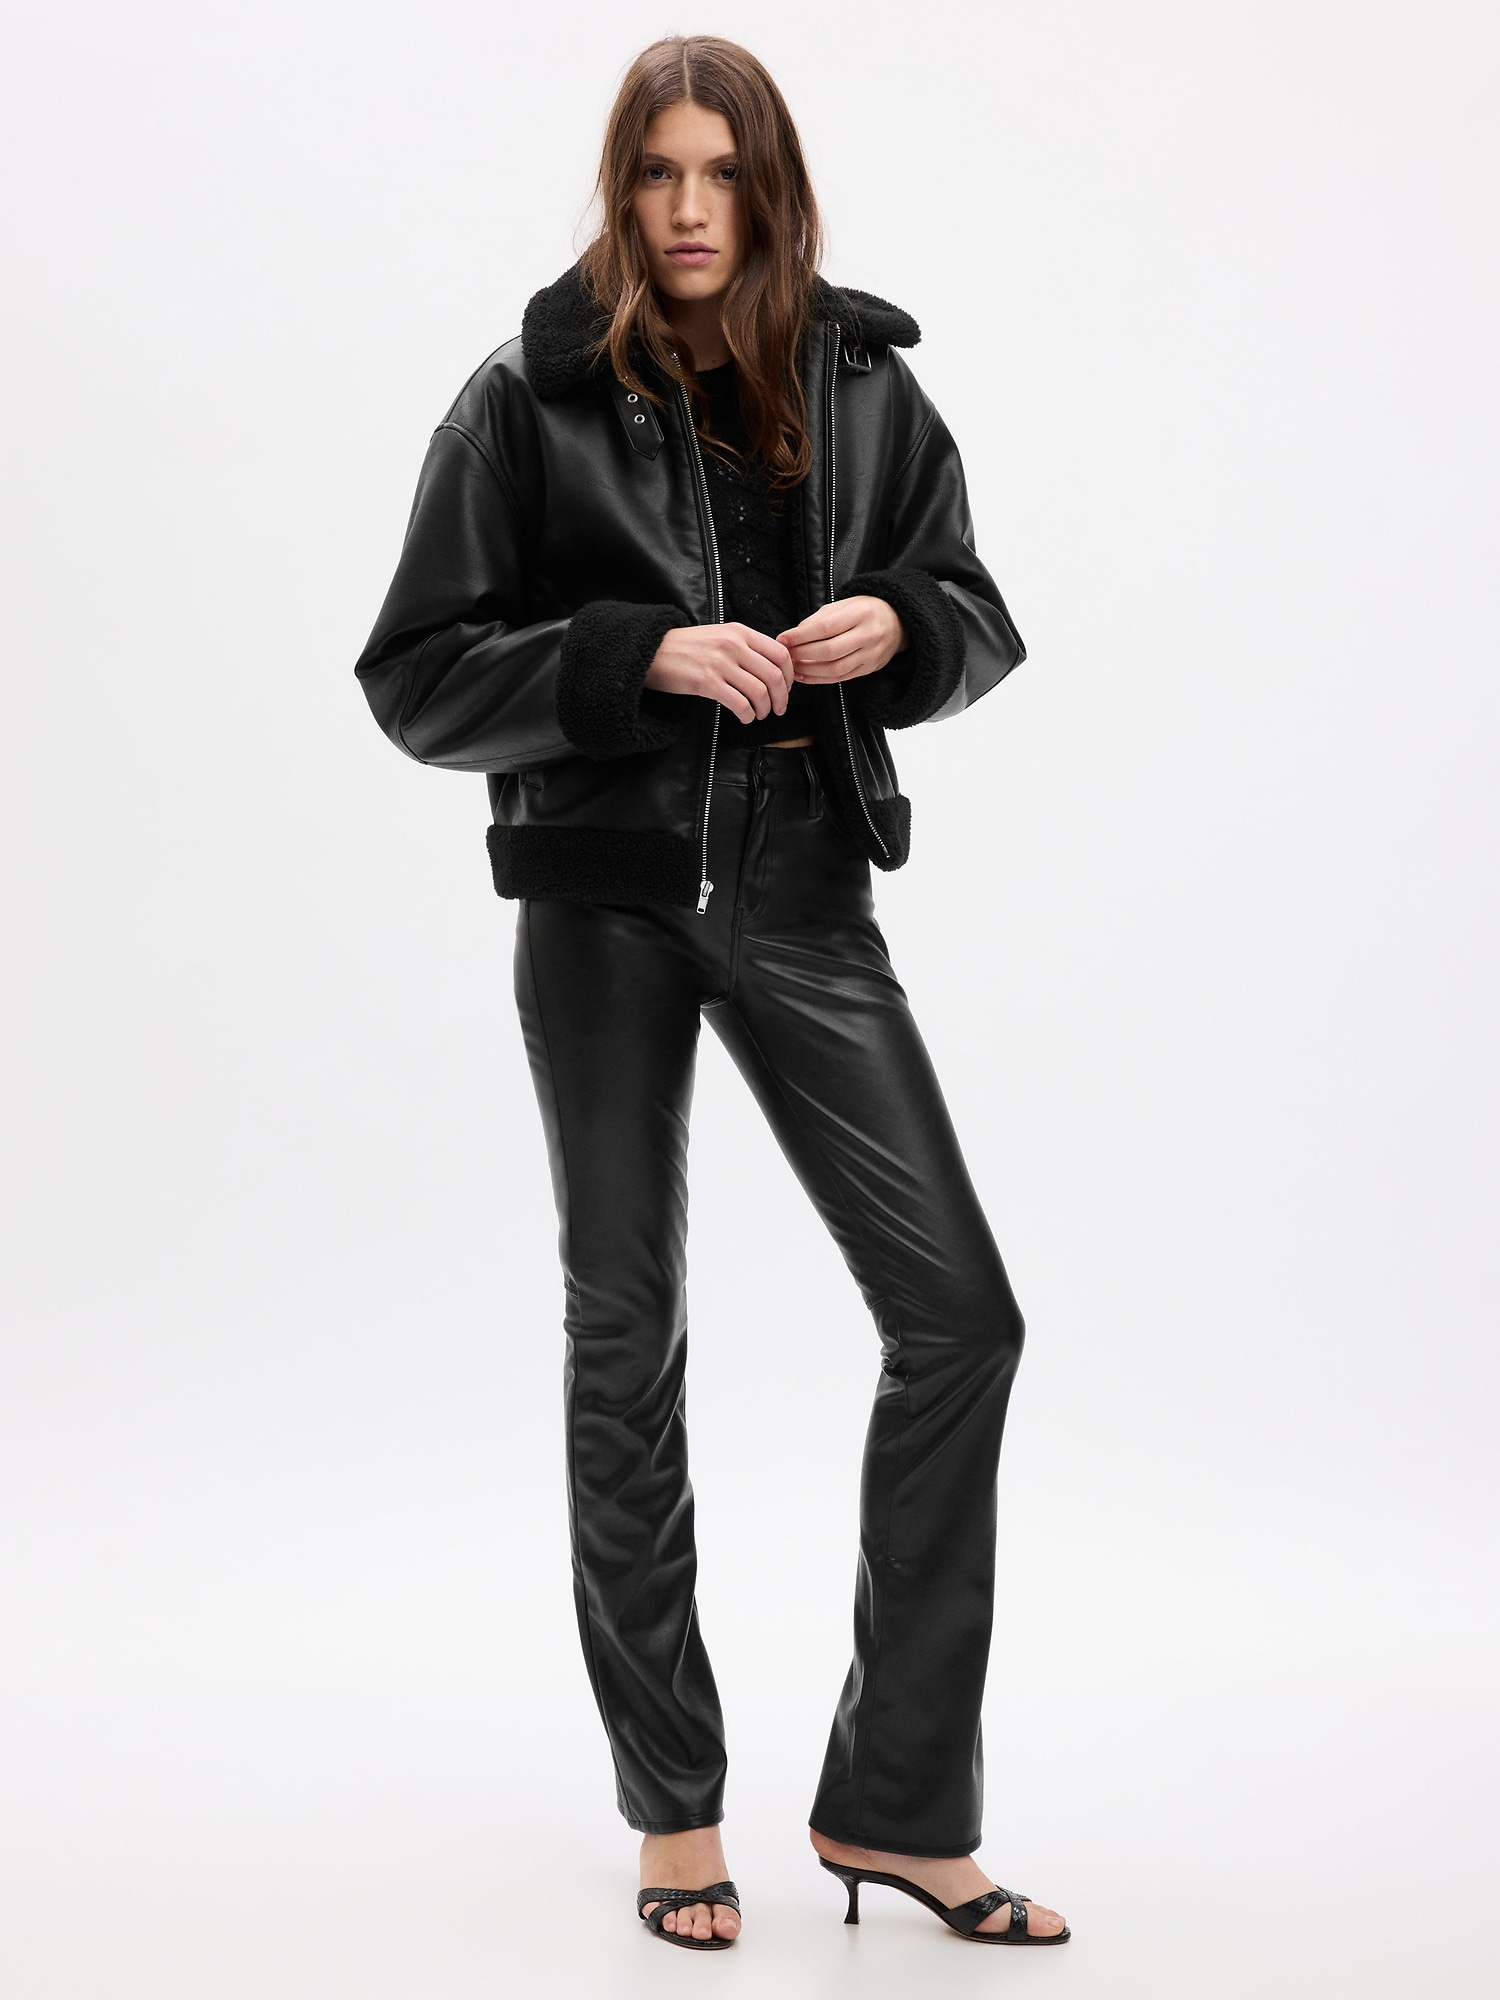 Mid Rise Vegan Patent Leather Baby Boot Pants